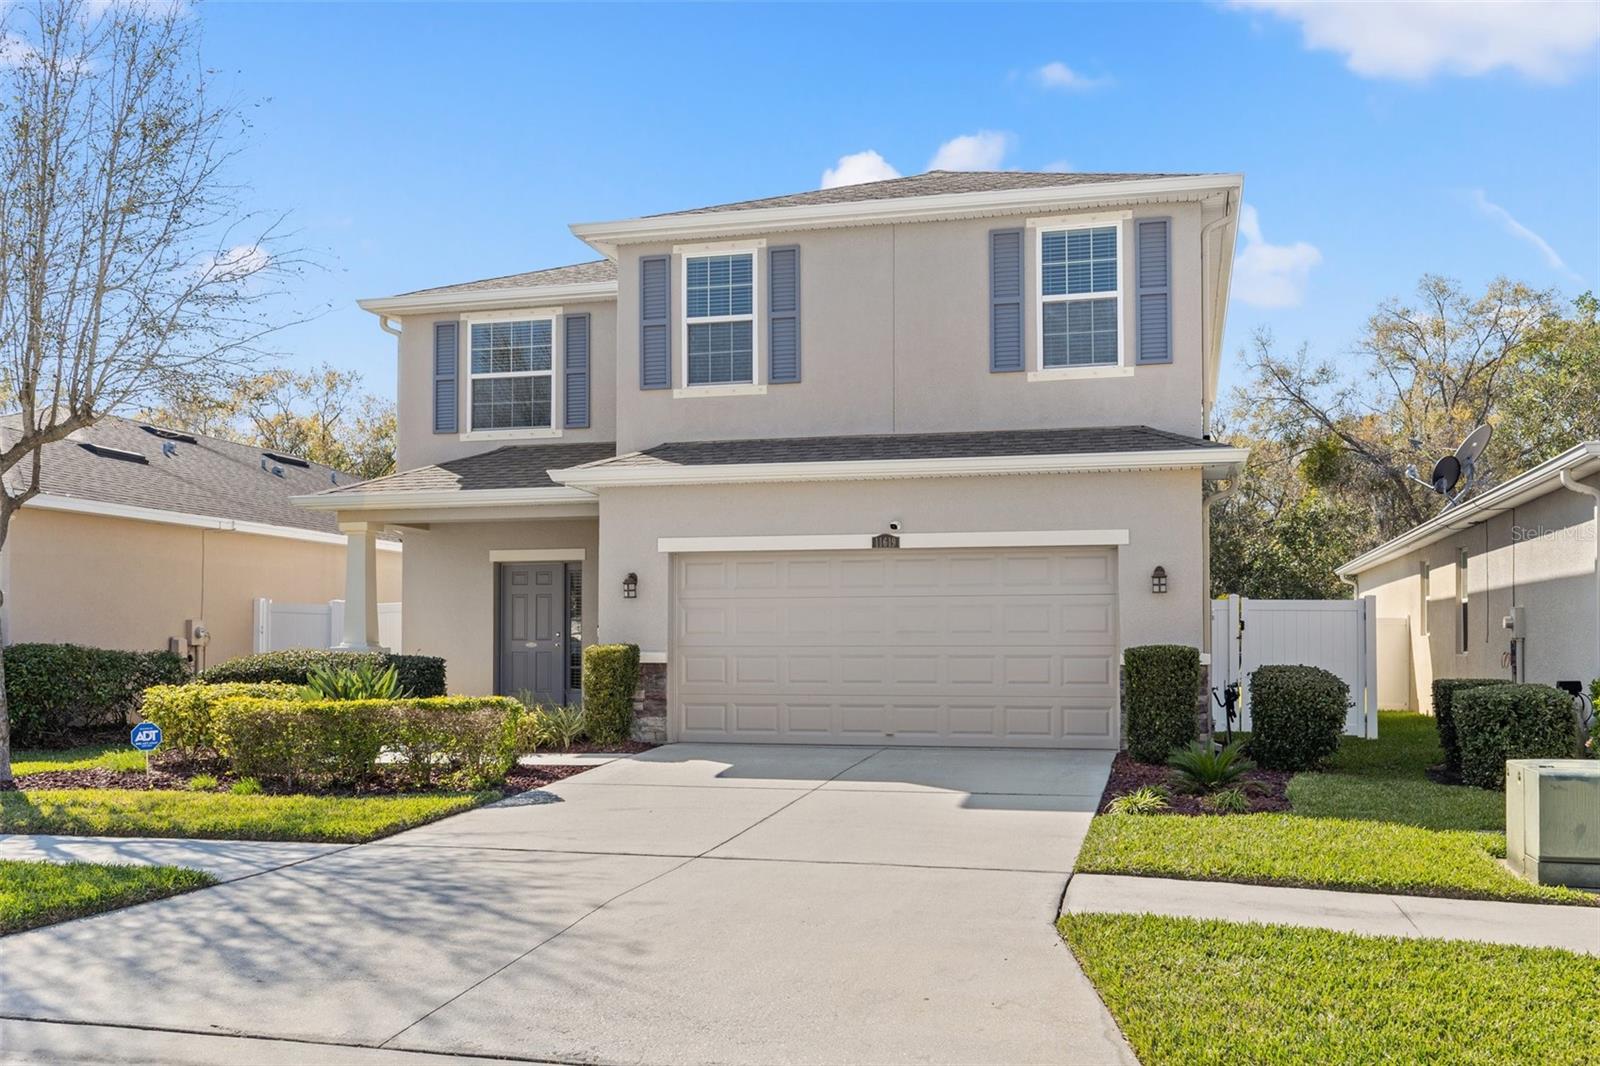 Details for 11619 Storywood Drive, RIVERVIEW, FL 33578